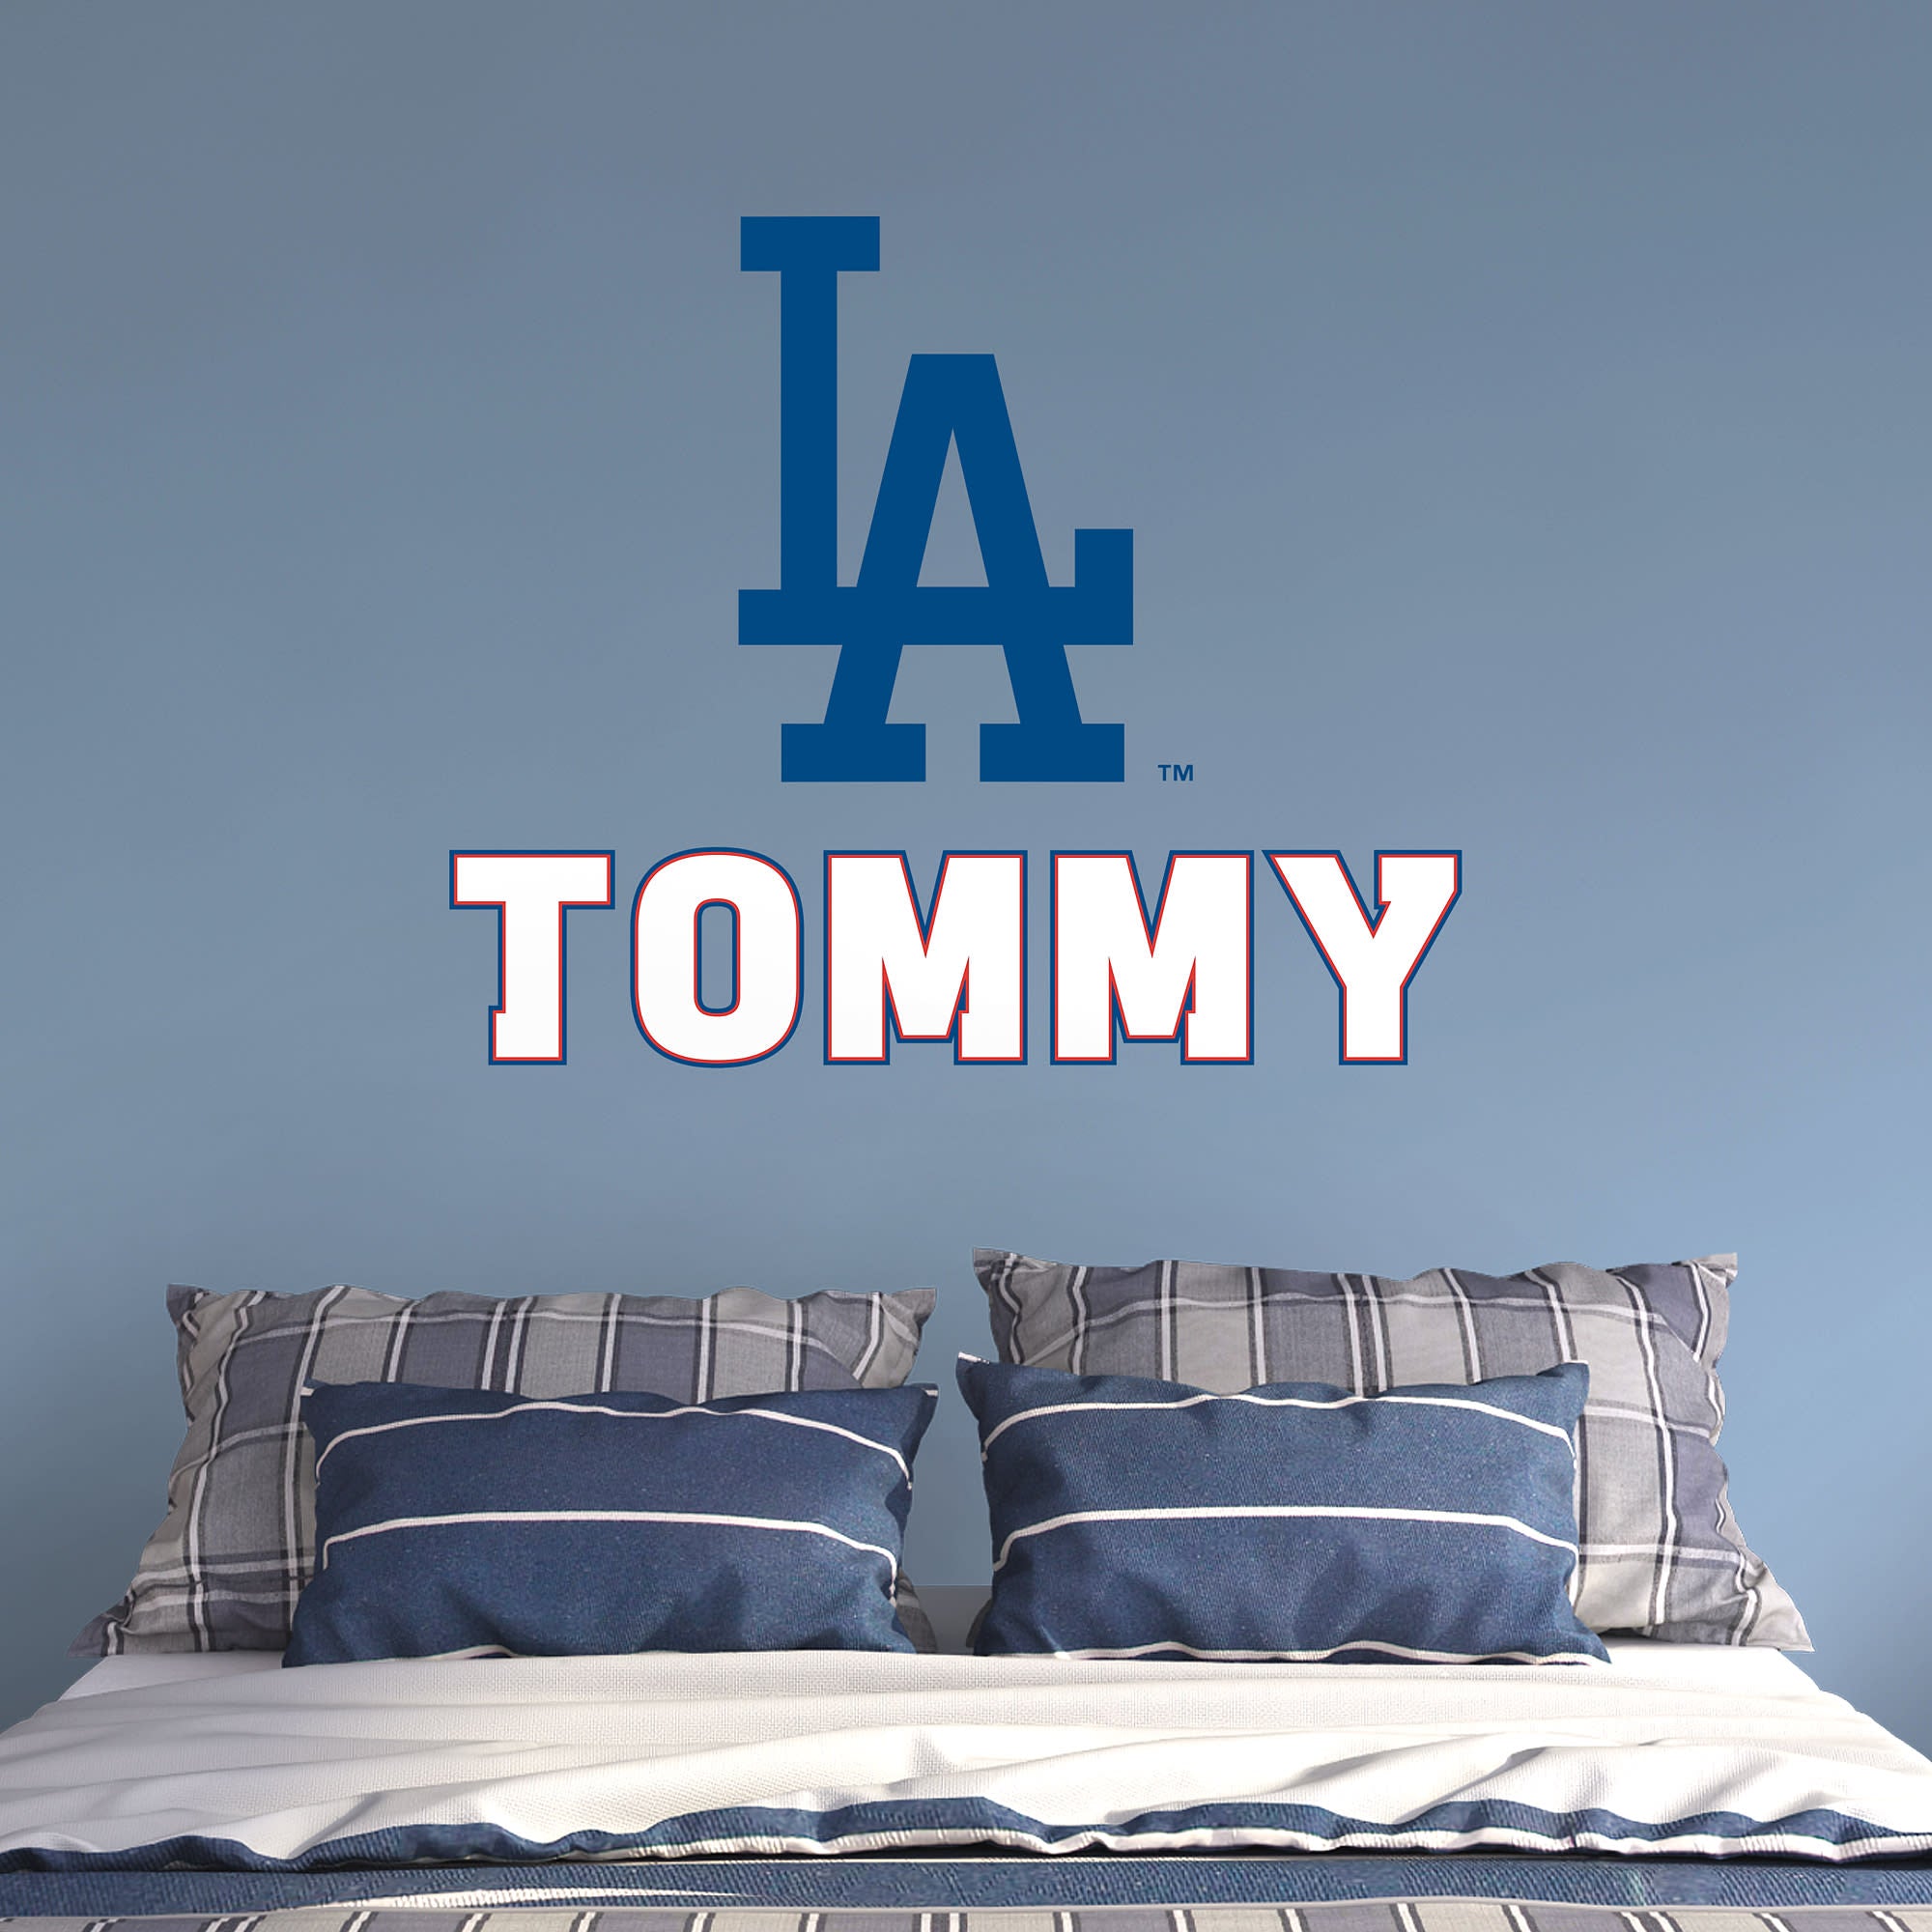 Los Angeles Dodgers: "LA" Stacked Personalized Name - Officially Licensed MLB Transfer Decal in Blue/White (52"W x 39.5"H) by Fa